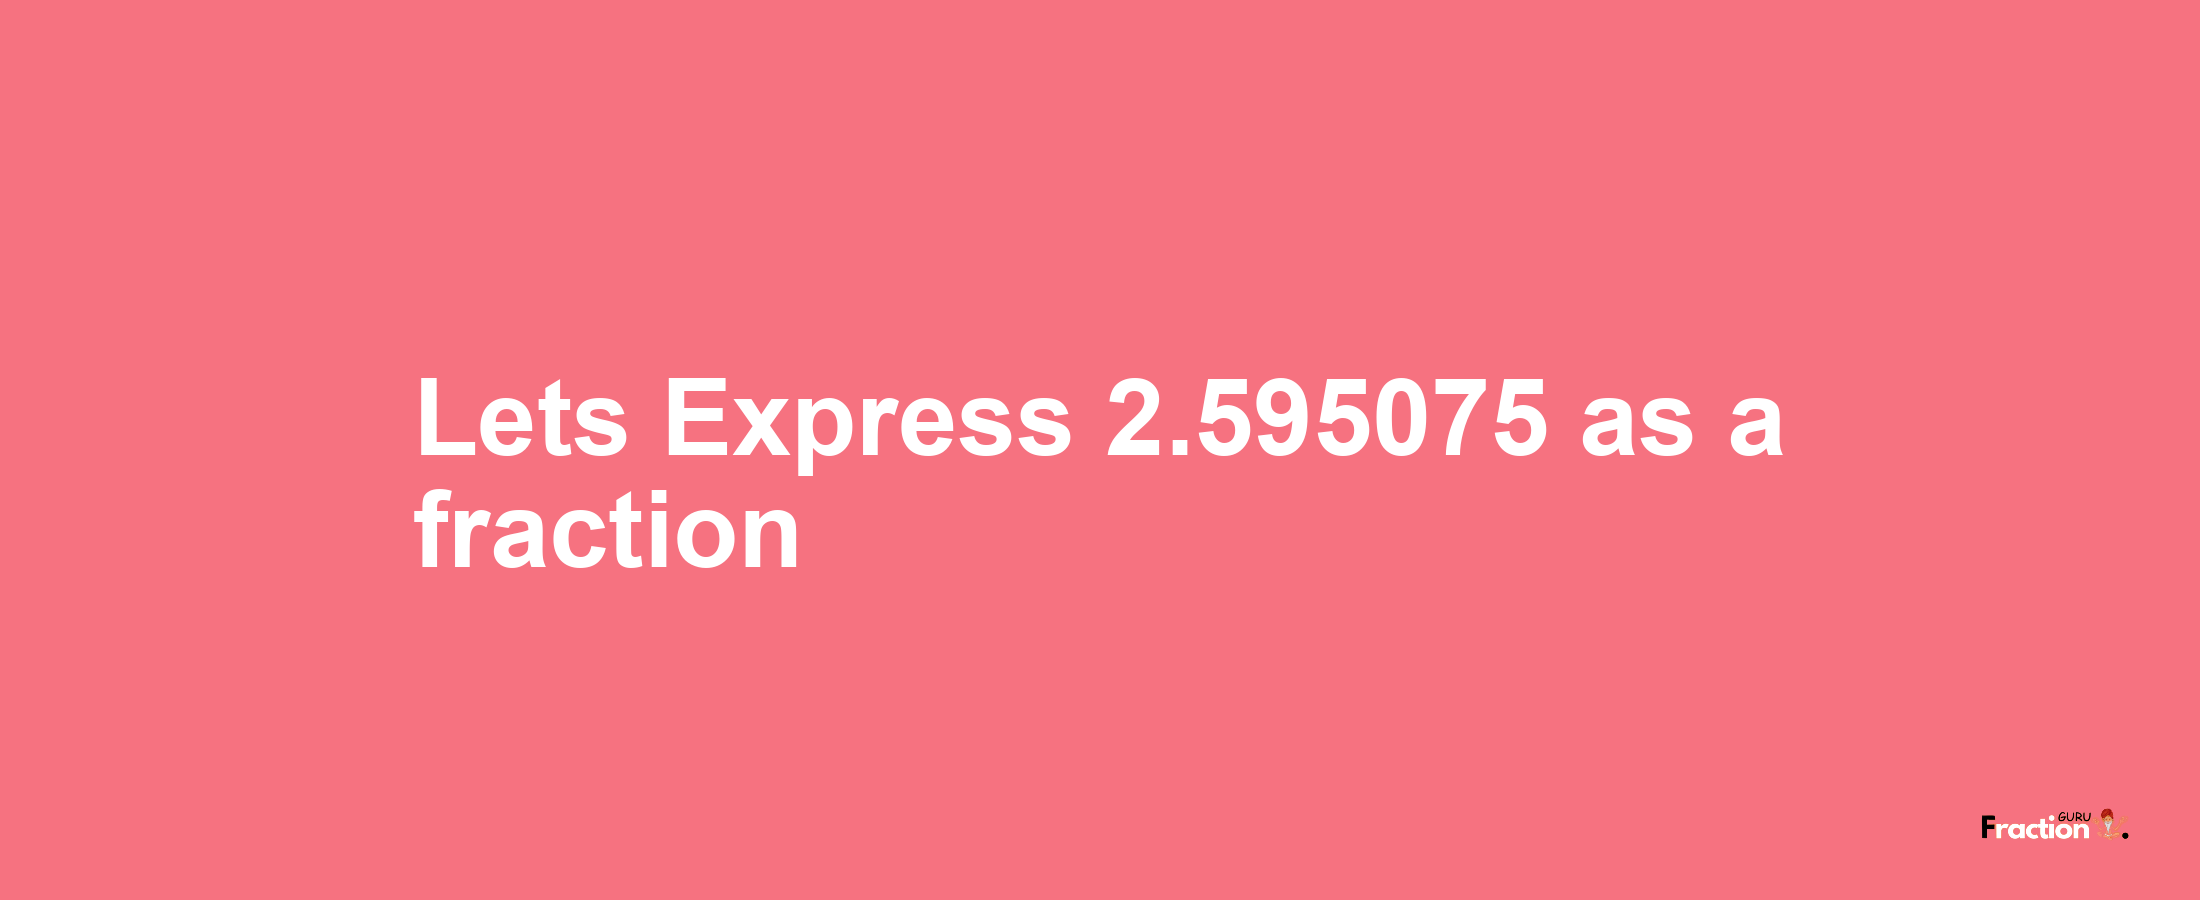 Lets Express 2.595075 as afraction